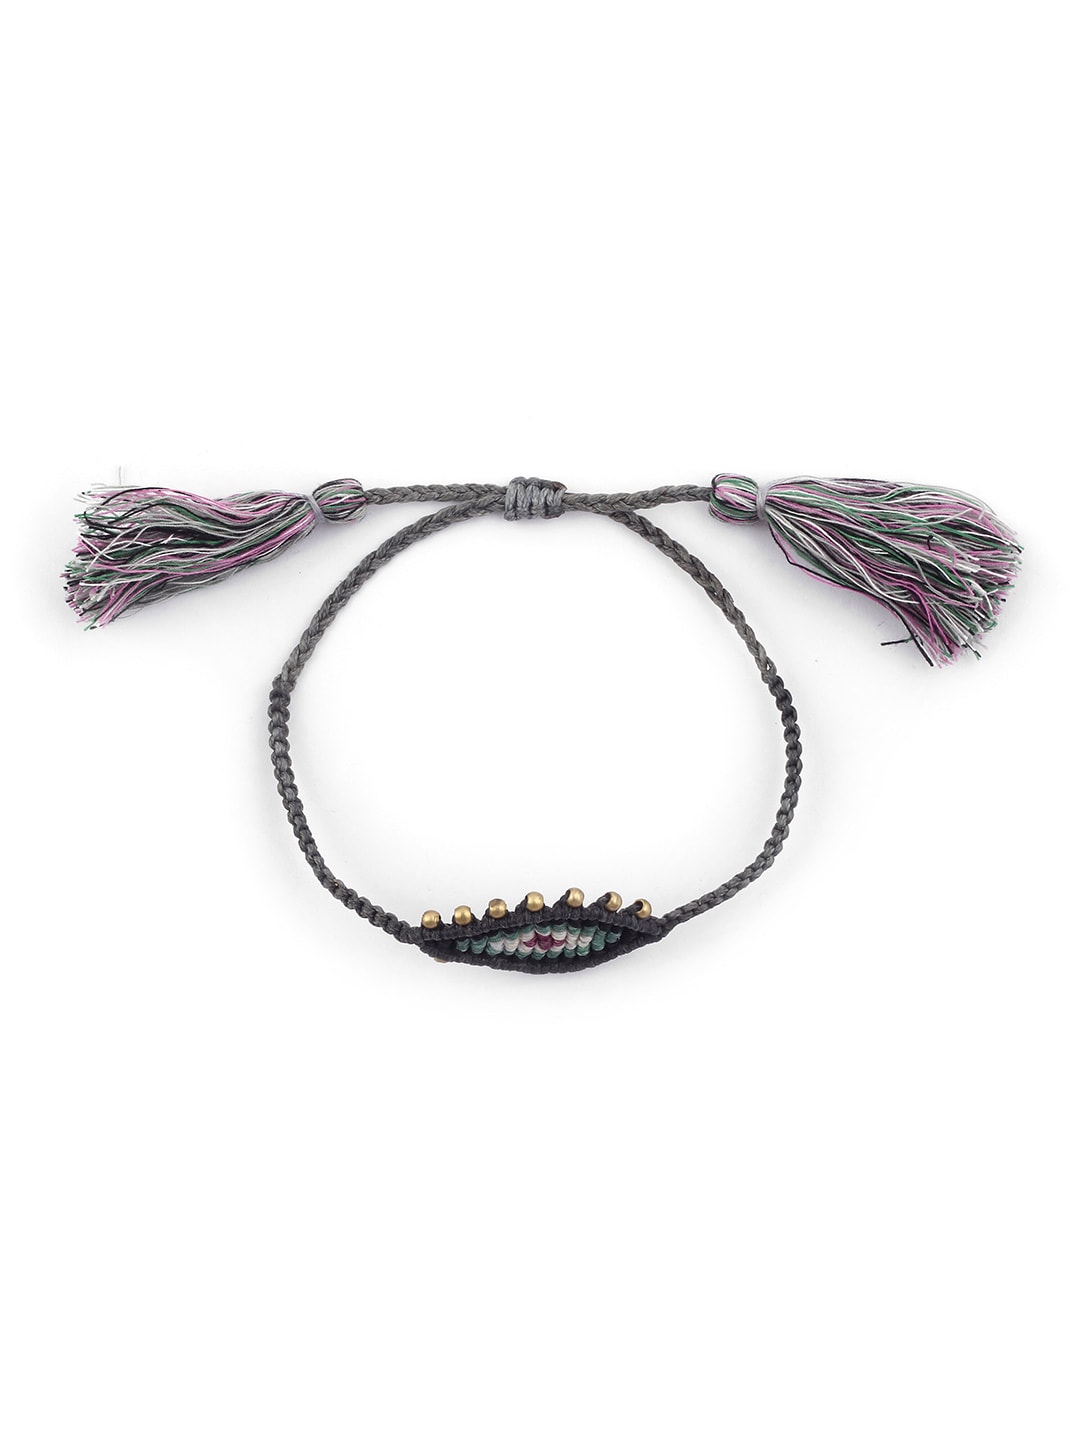 EL REGALO Women Grey & Black Wraparound Handcrafted Bracelet - for Women and Girls
Style ID: 17147906